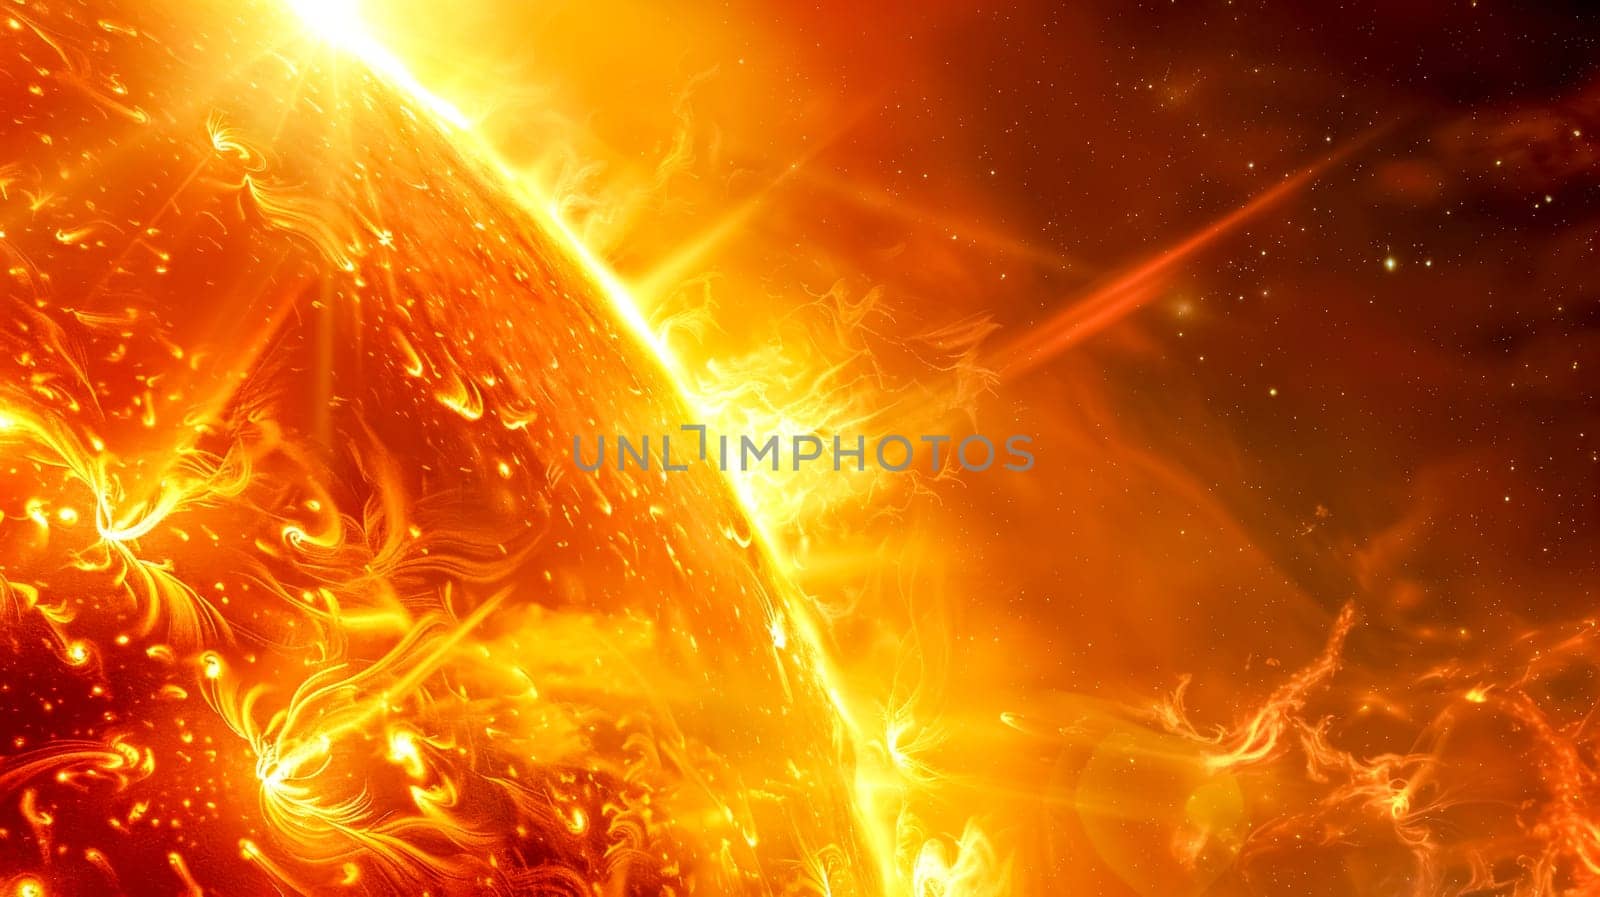 Vivid illustration depicting the intense and dynamic surface of the sun with solar flares